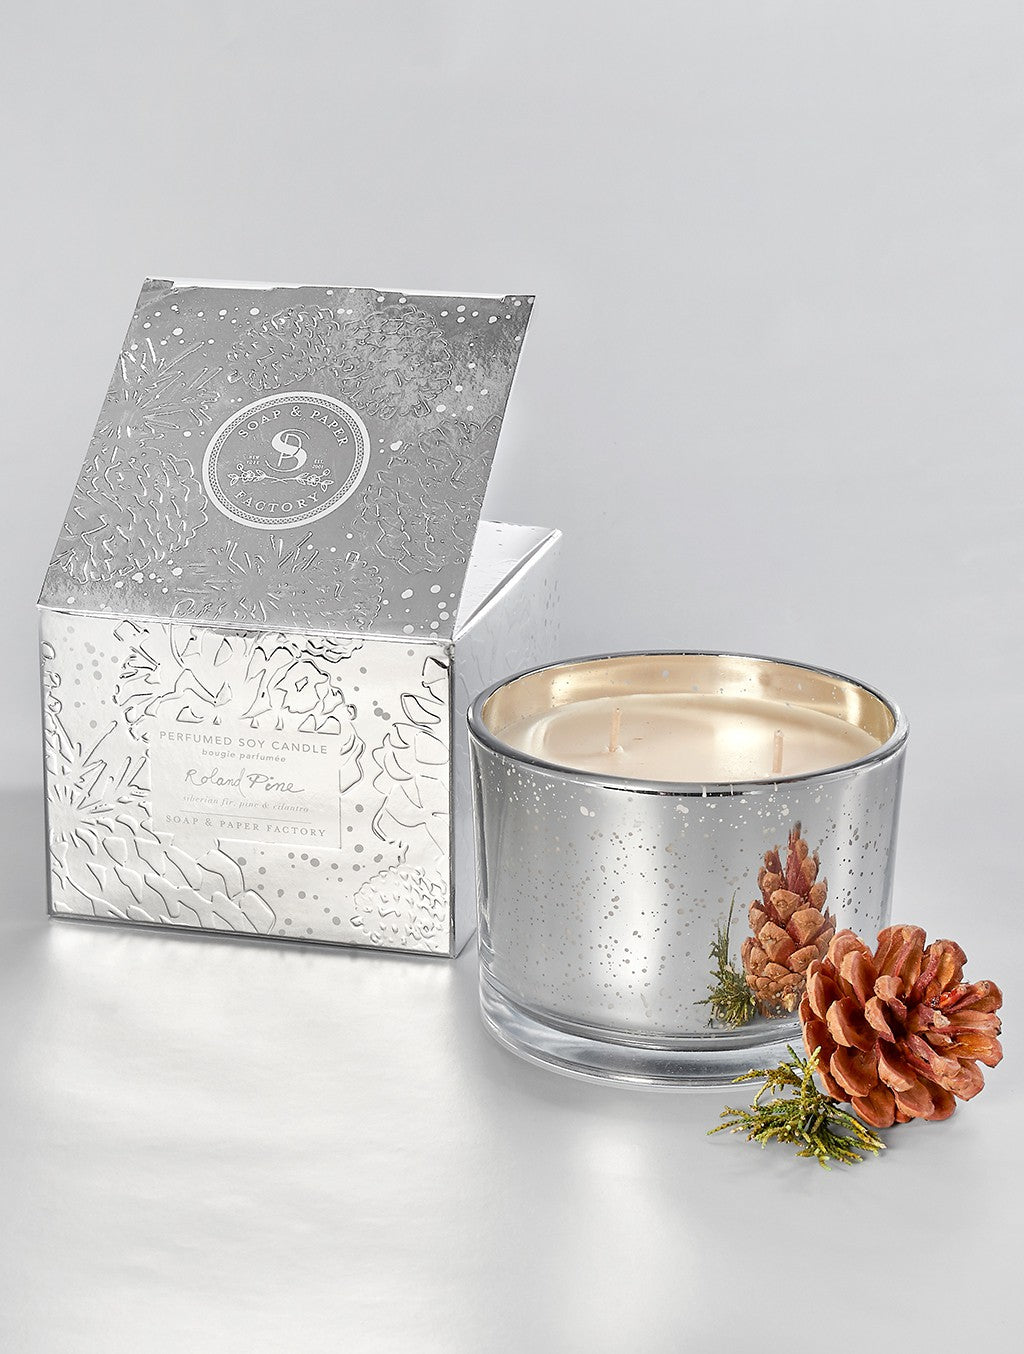 Roland Pine Lumiere Two Wick Soy Candle